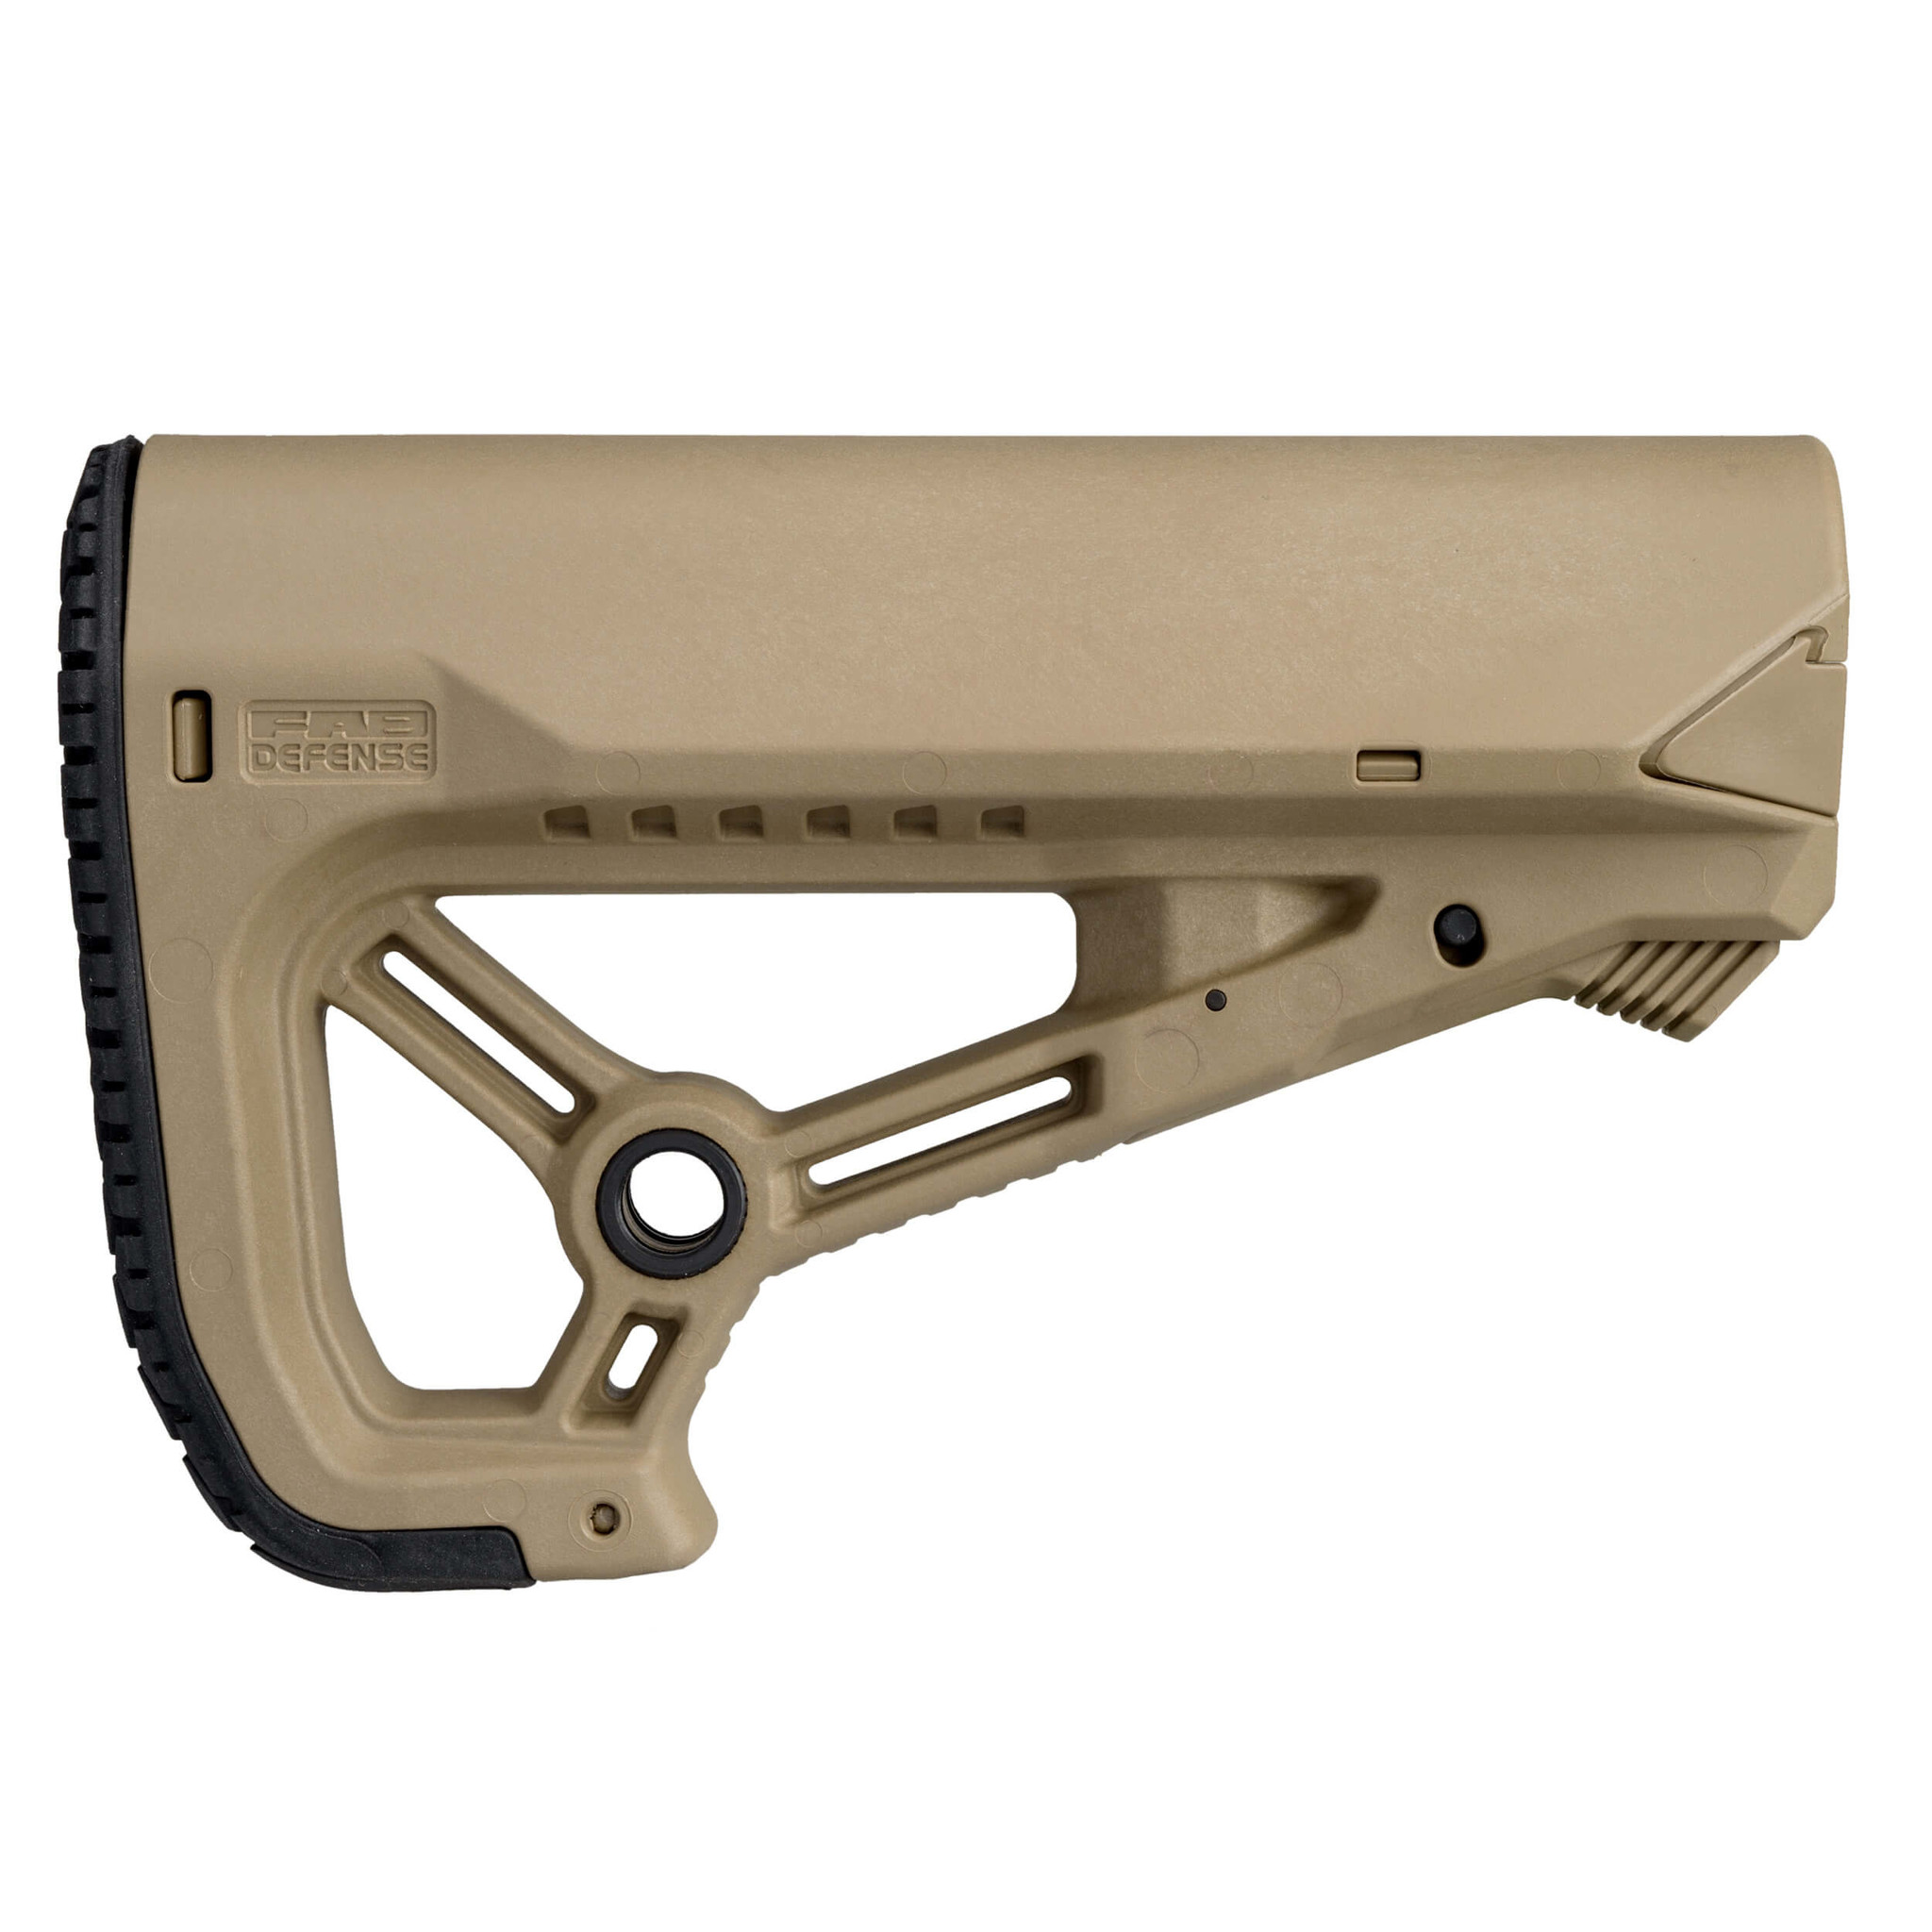 FAB Defense GL-CORE AR15 / M4 Buttstock for Mil-Spec and Commercial Tubes - TAN